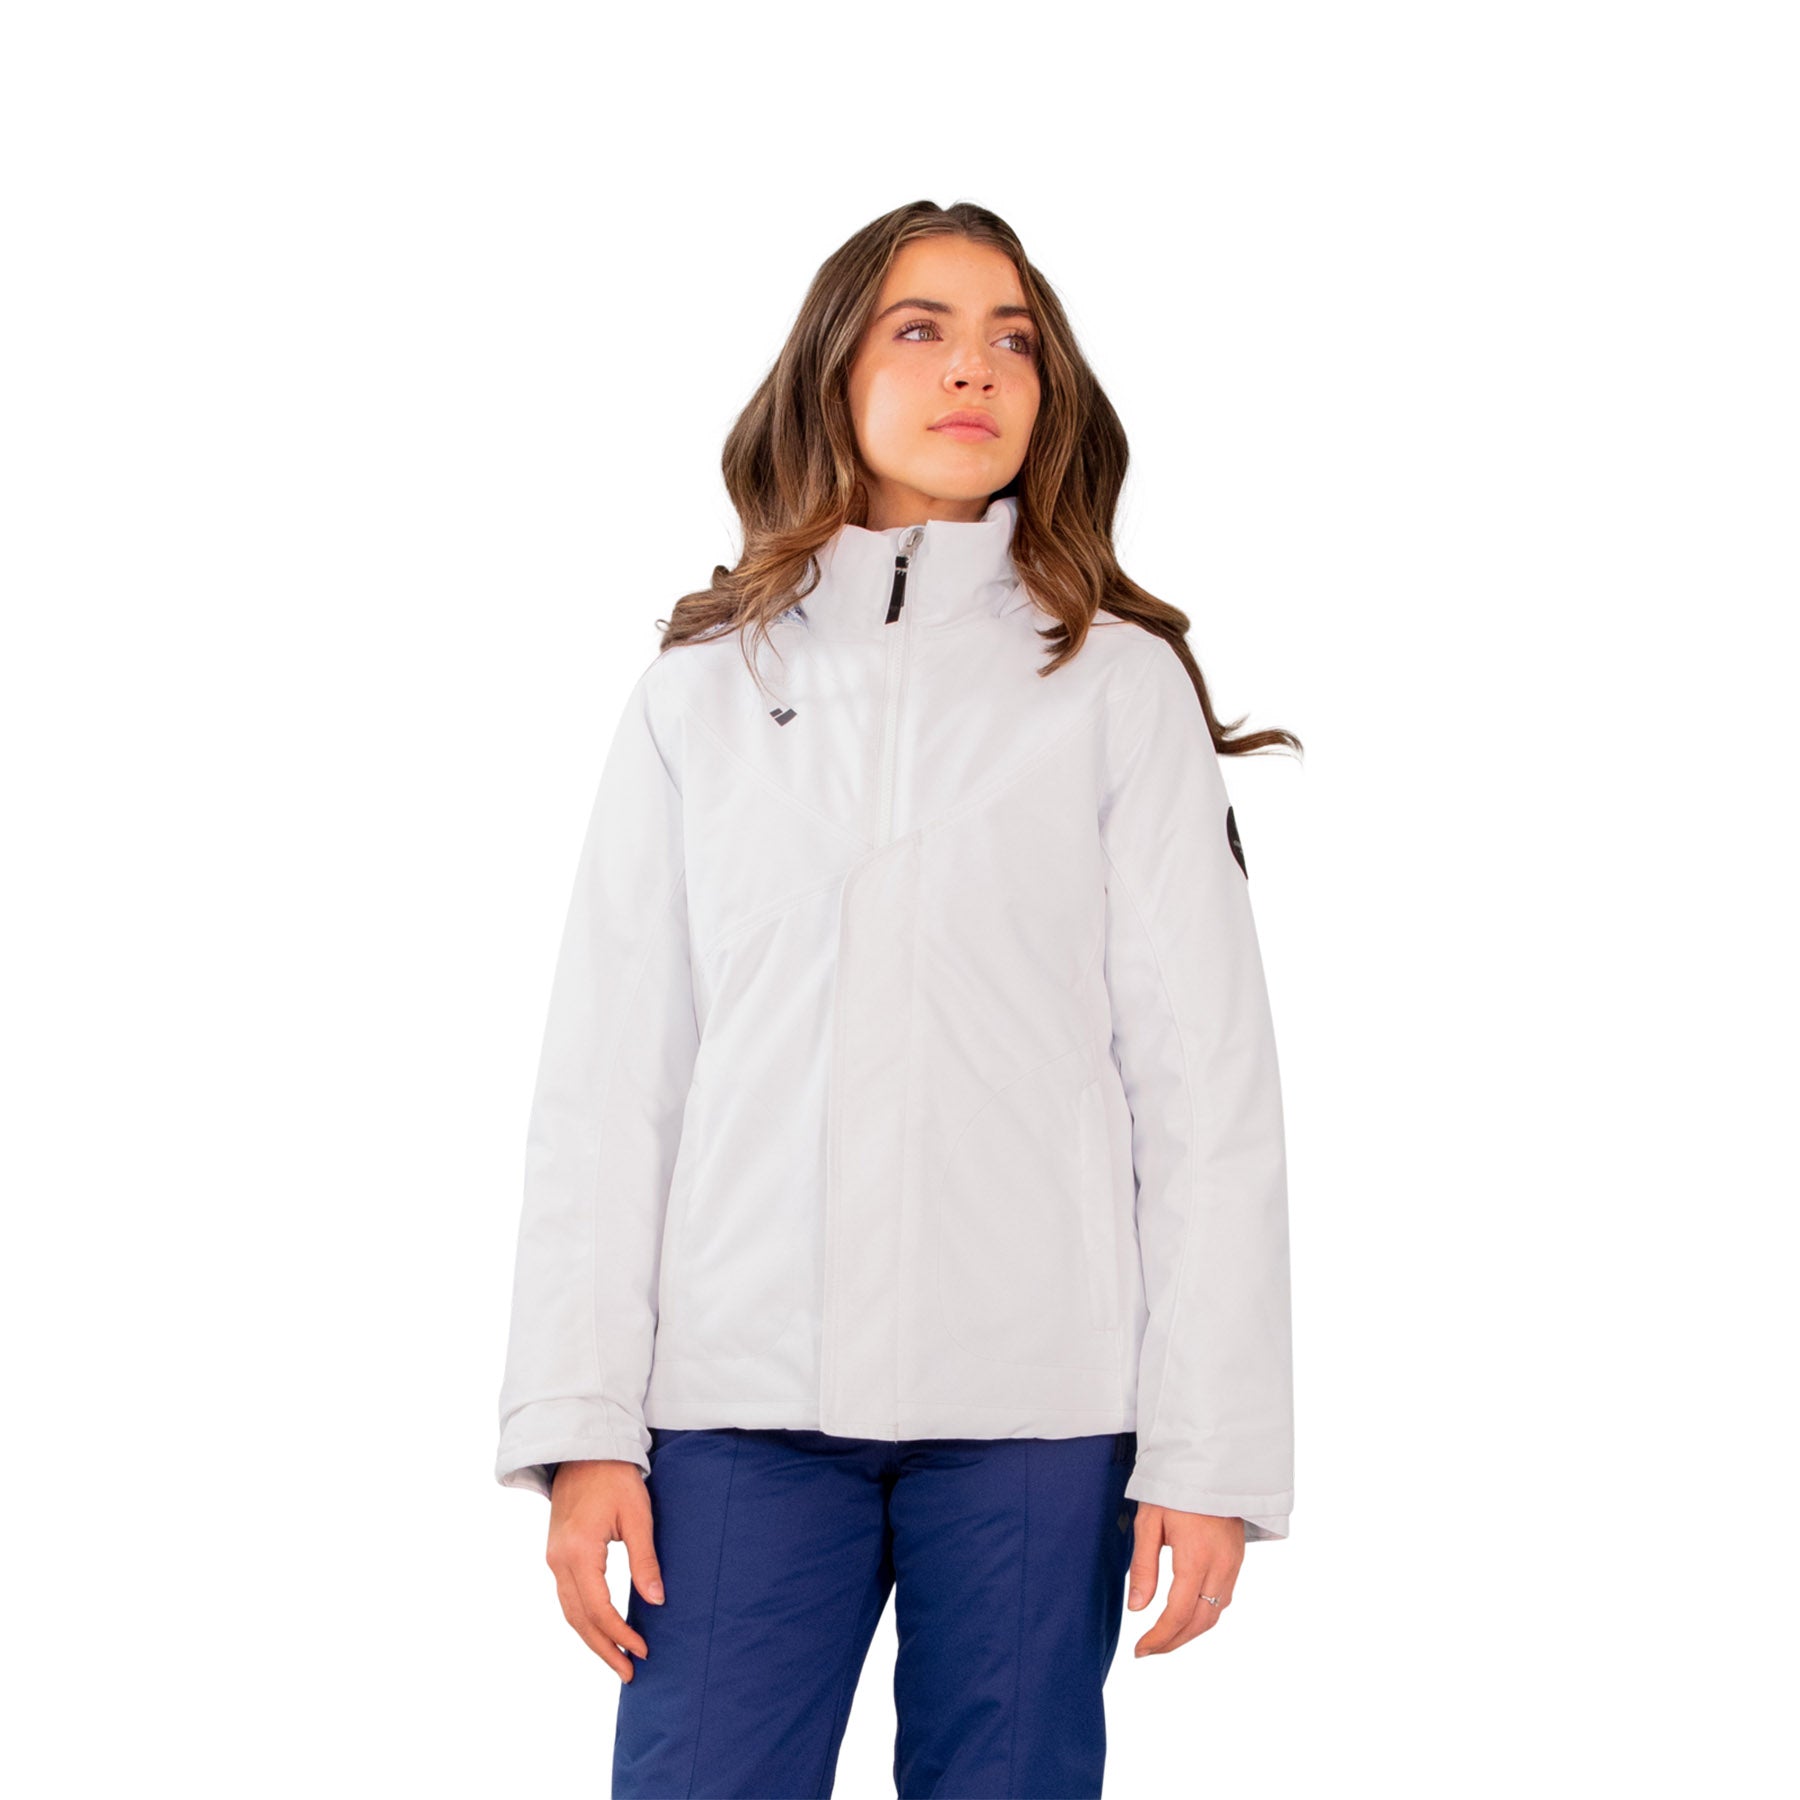 Image features a female model wearing the Obermeyer girls Rylee Jacket in white with blue ski pants.